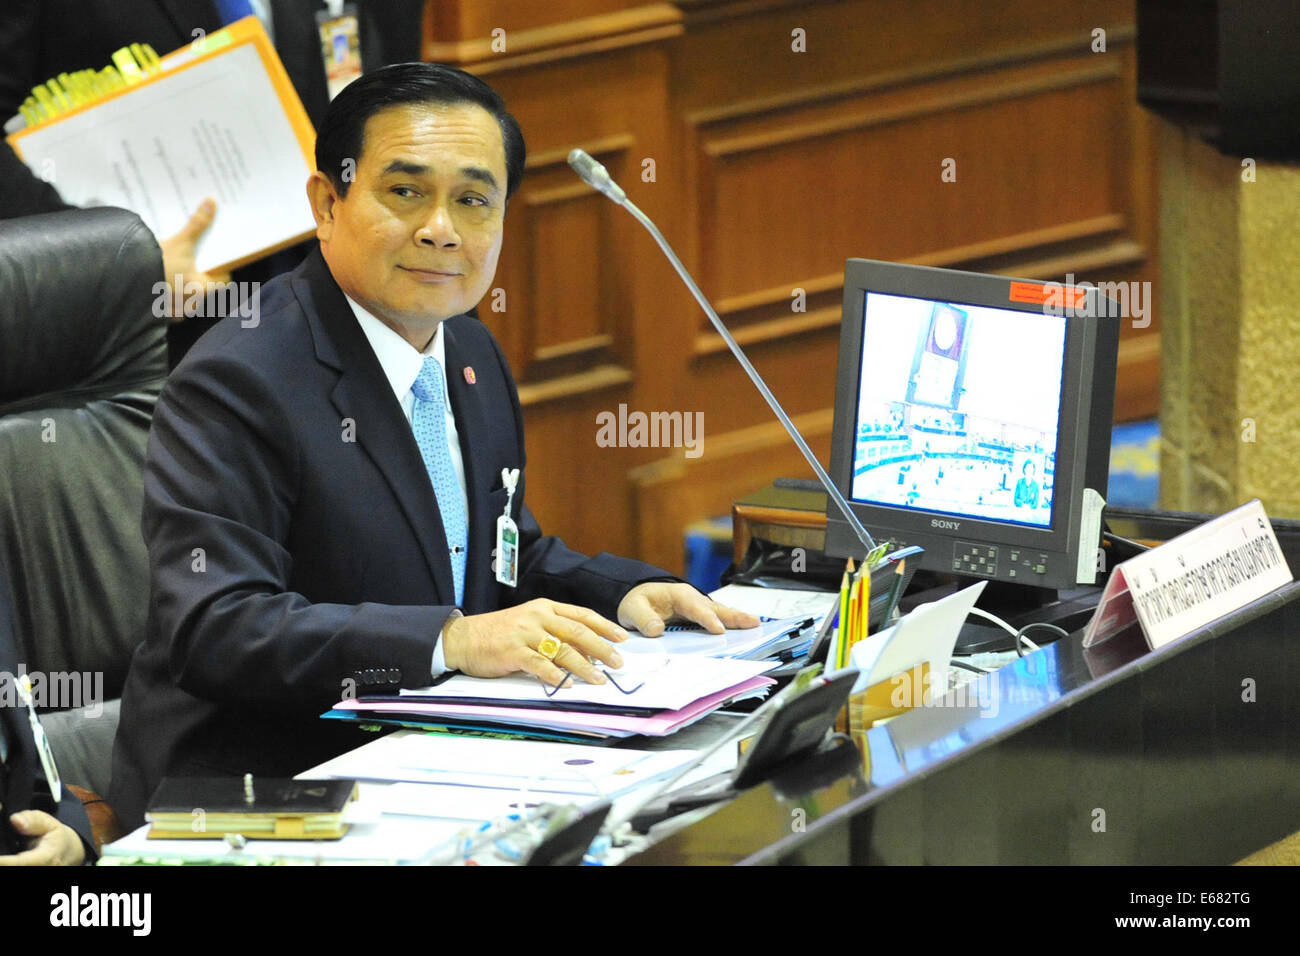 Bangkok, Thailand. 18th Aug, 2014. Thai Army Chief Gen. Prayuth Chan-ocha attends the meeting to propose the 2015 budget in Bangkok, Thailand, Aug. 18, 2014. He proposed the bill at the first meeting of National Legislative Assembly held at the Parliament House on Monday. © Rachen Sageamsak/Xinhua/Alamy Live News Stock Photo